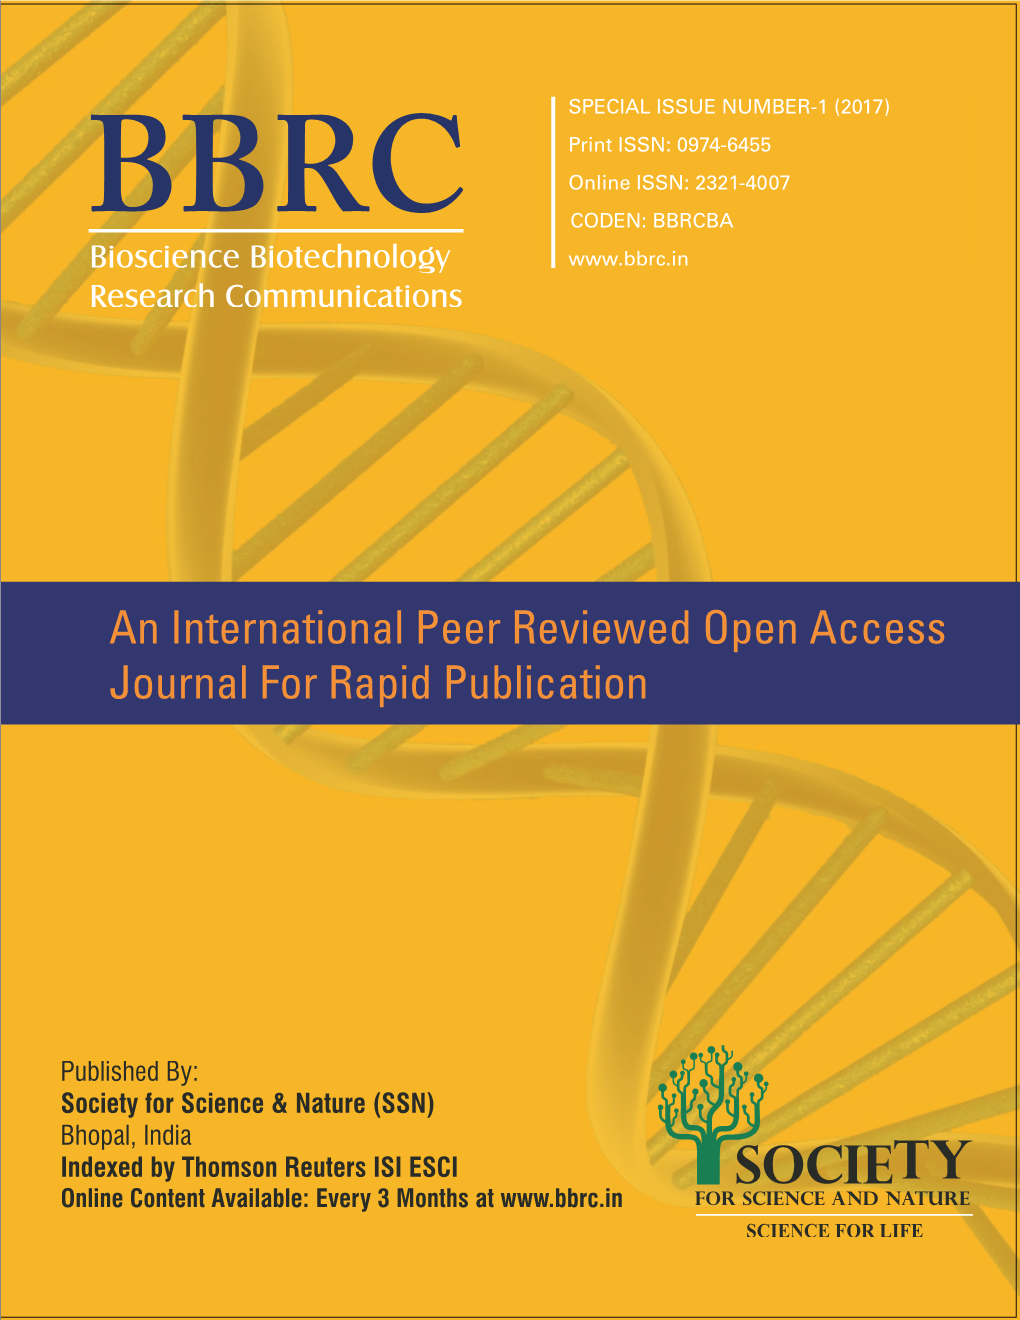 An International Peer Reviewed Open Access Journal for Rapid Publication Registered with the Registrar of Newspapers for India Under Reg